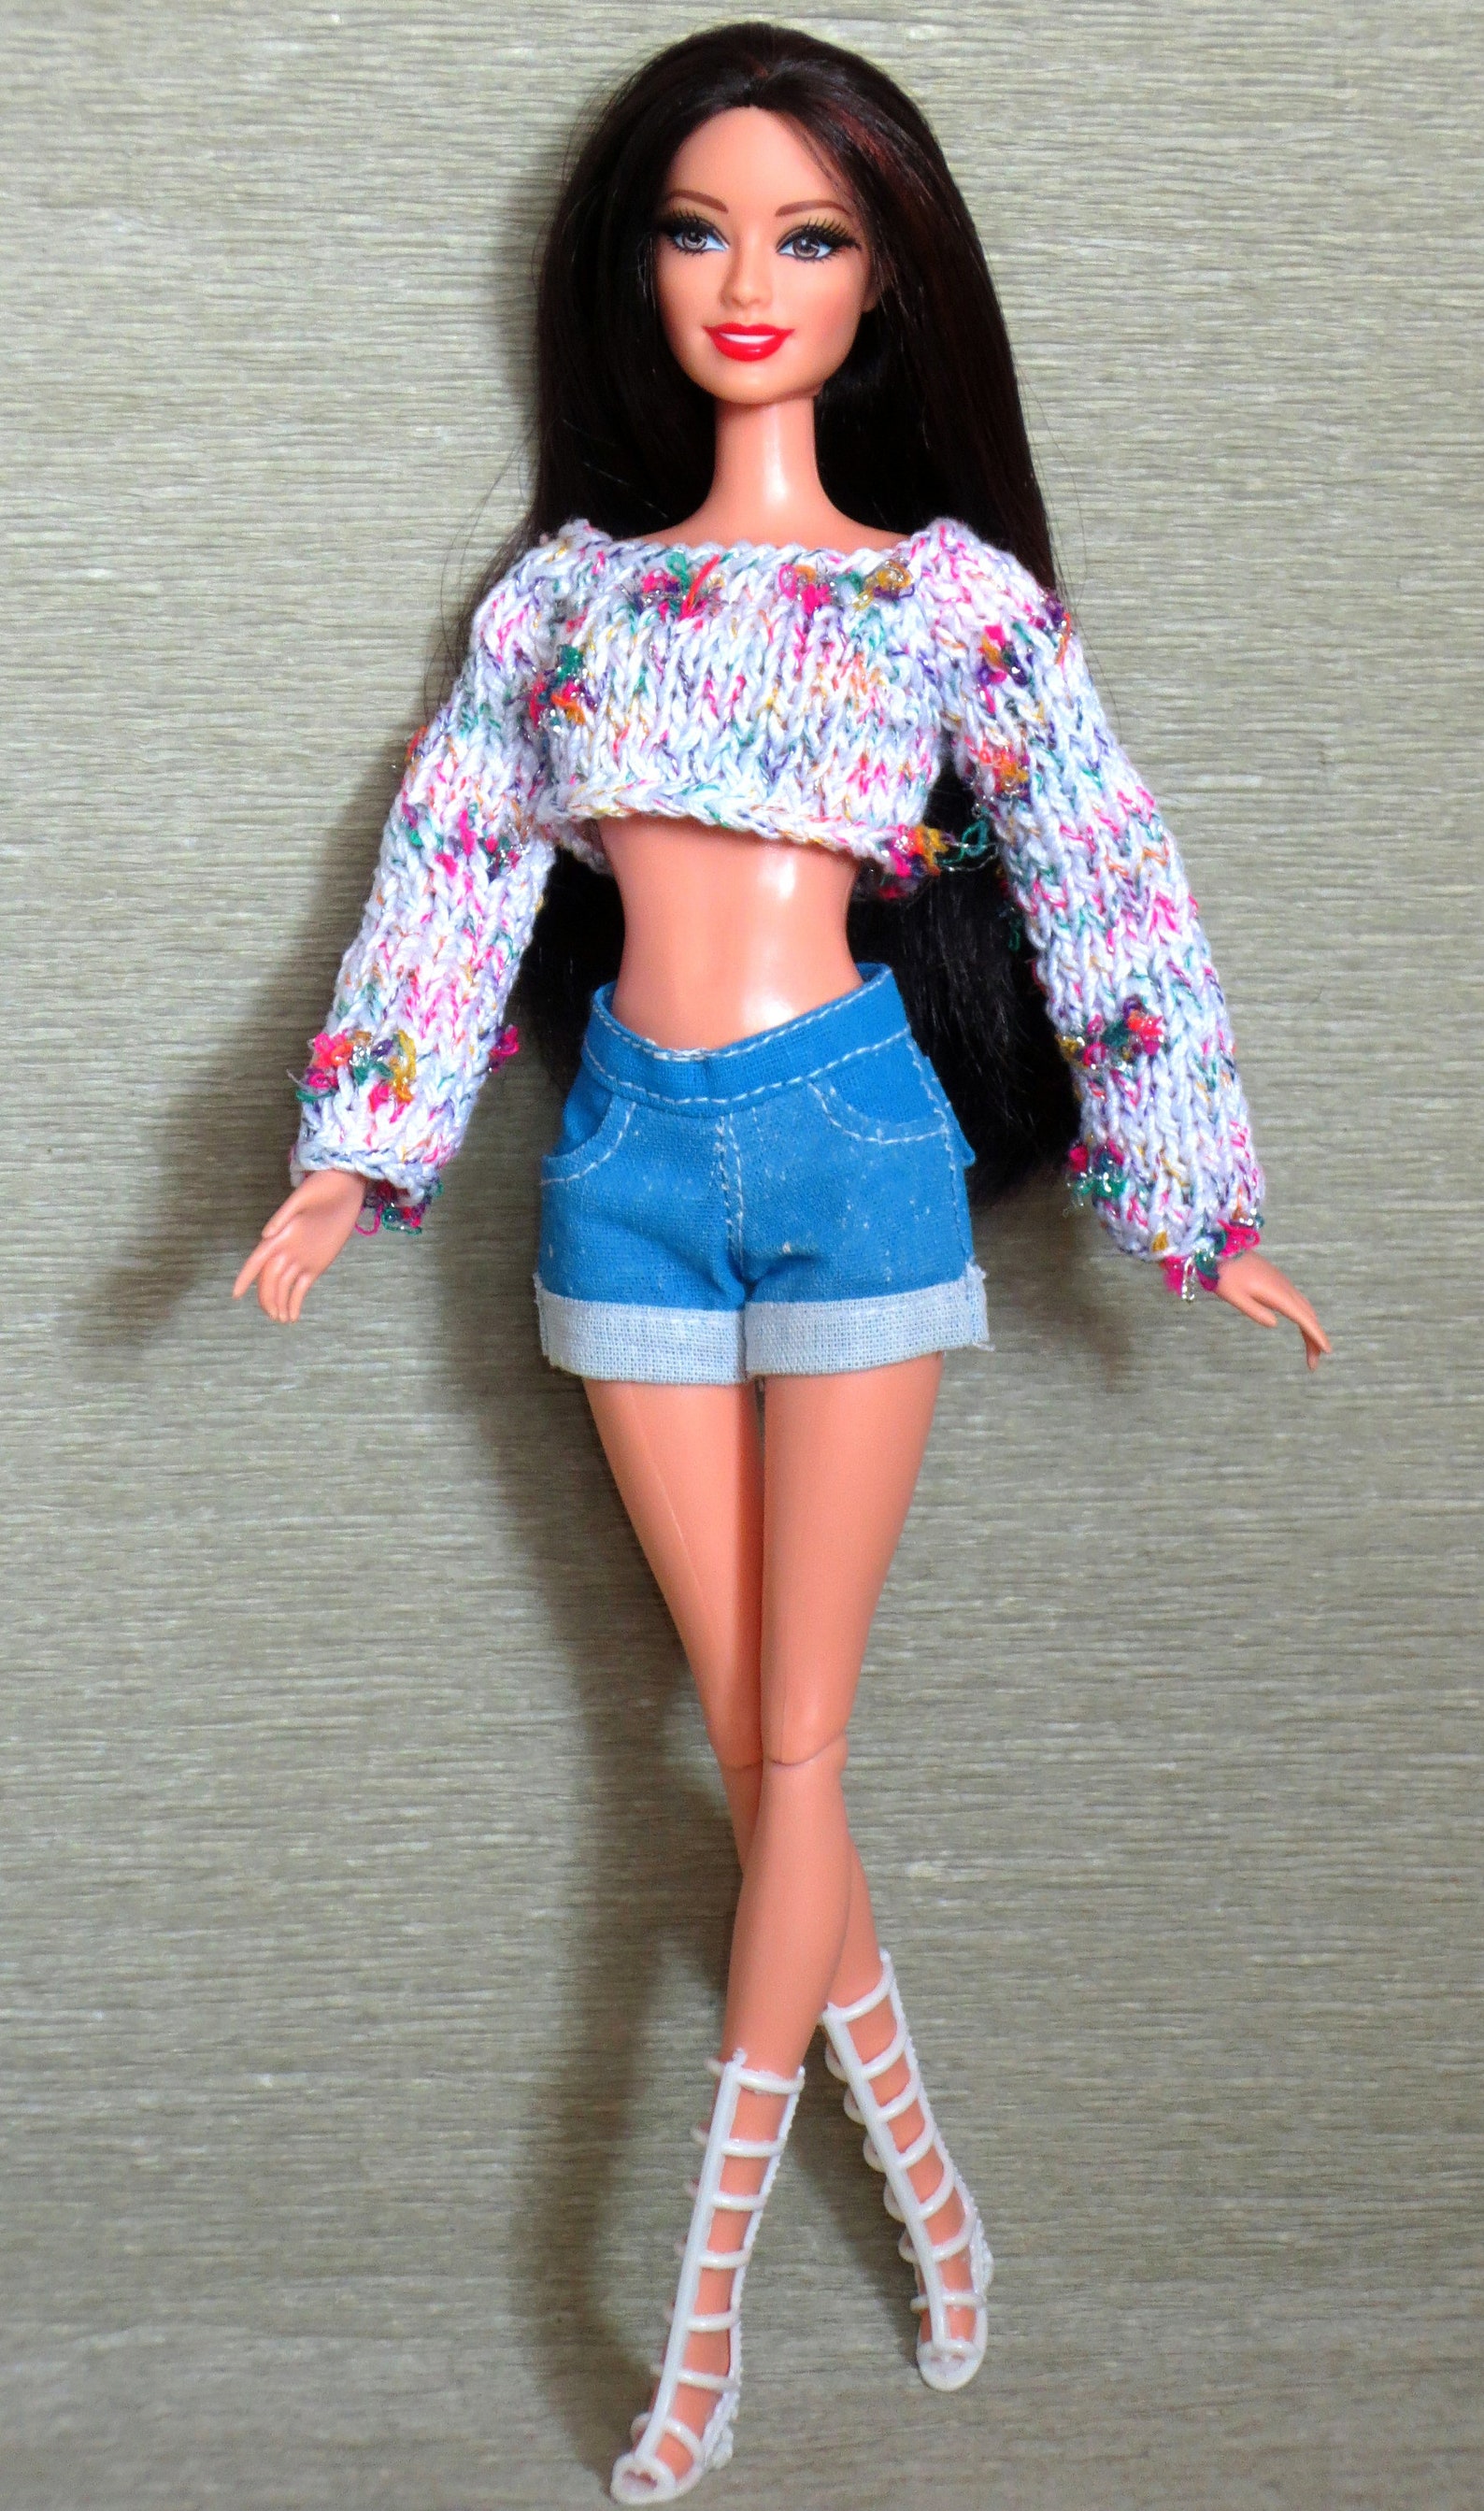 Crop top for Barbie dolls Cropped sweater for Barbie Barbie | Etsy